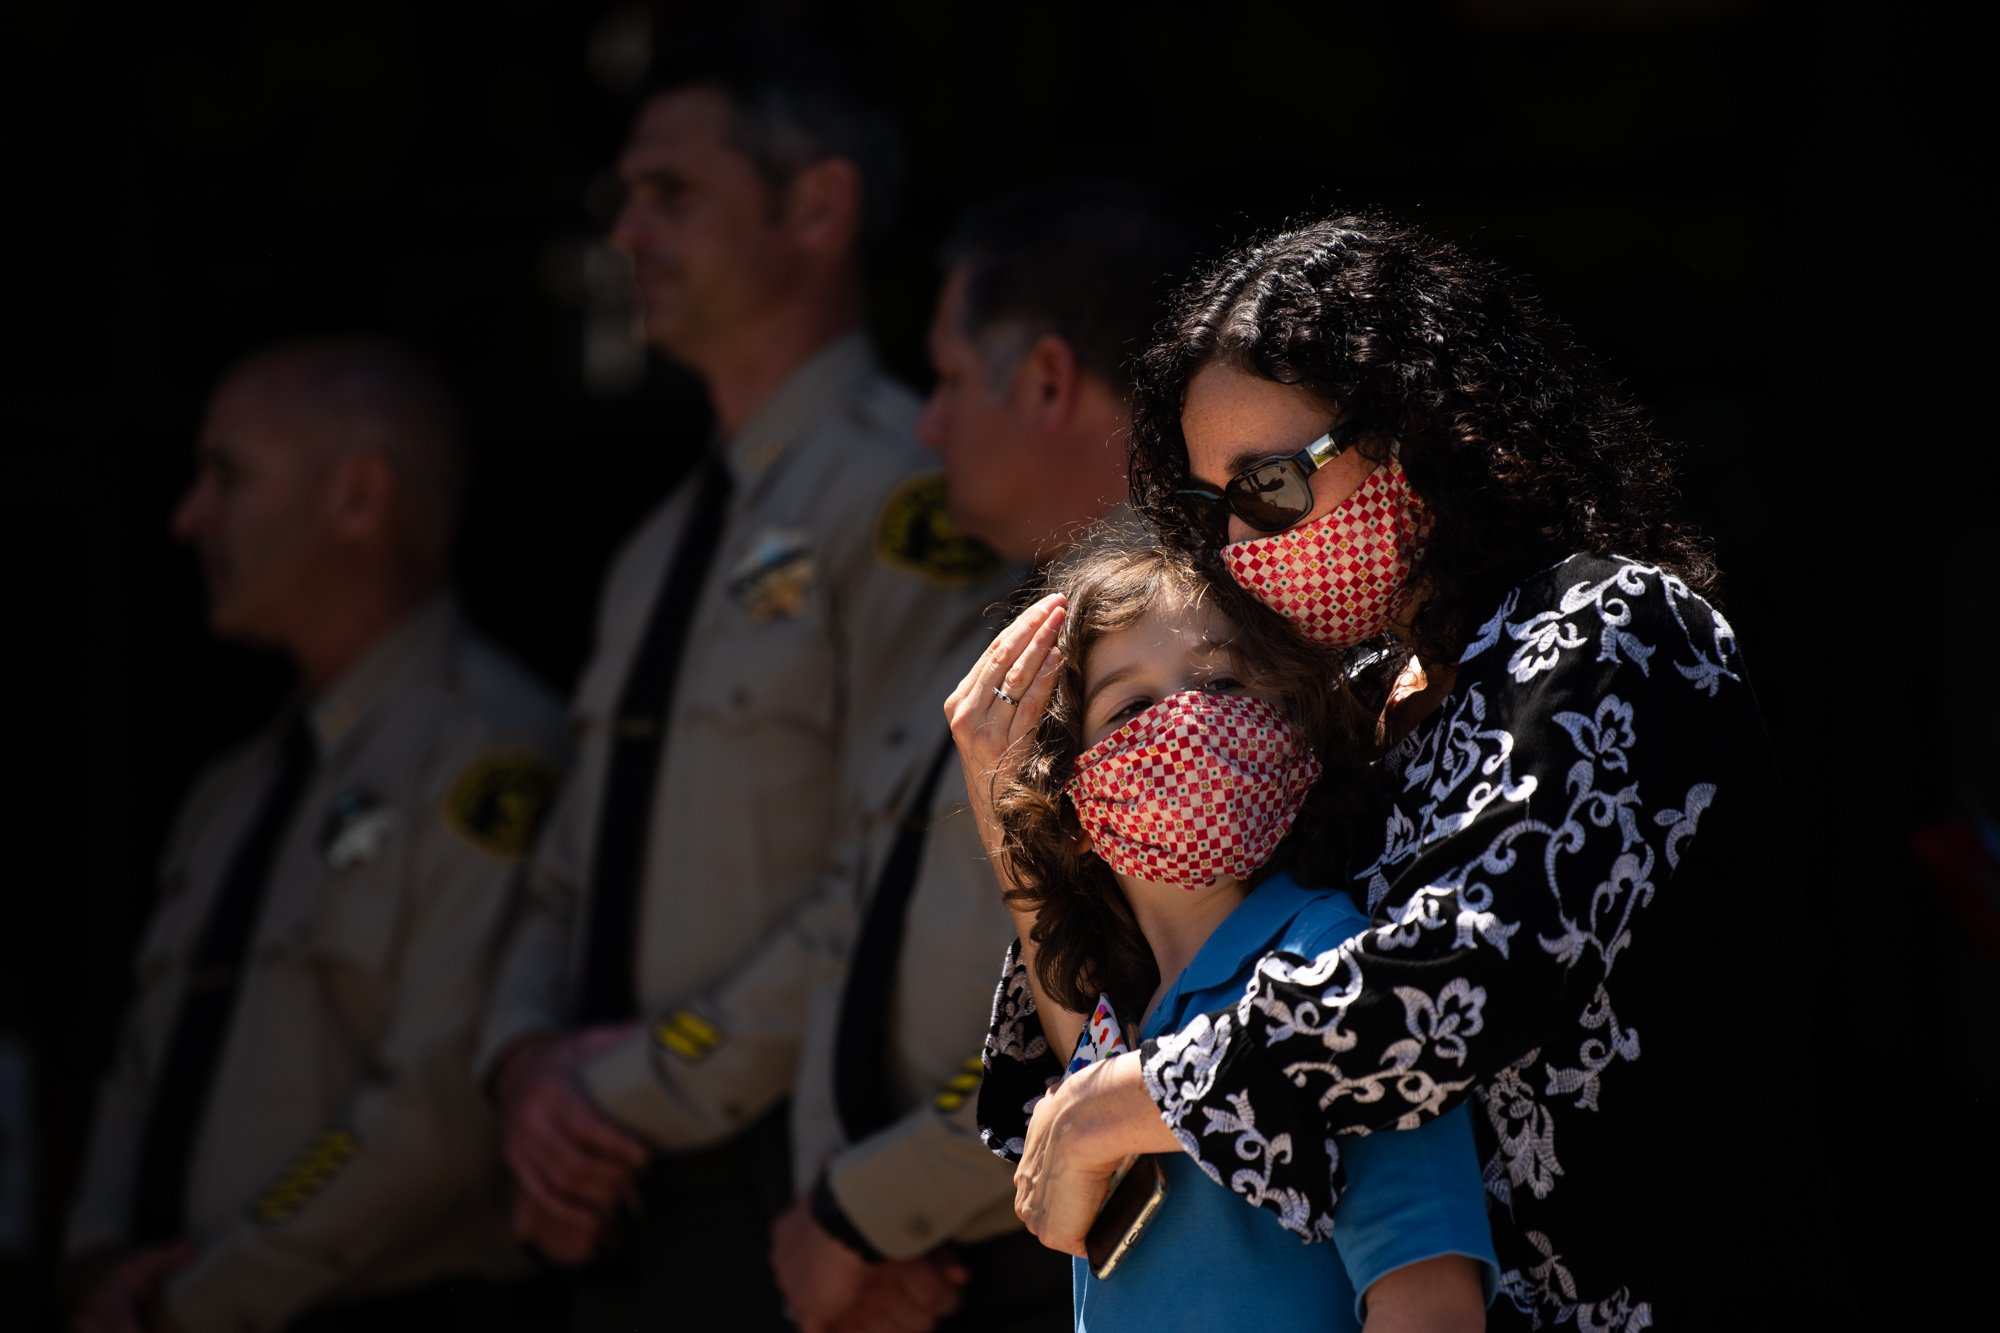 Sheriff Jim Hart's wife, Jackie, consoles their son during the community vigil for the death of Sgt. Damon Gutziller in front of the Santa Cruz County Sheriff's Office on Sunday afternoon. Sgt. Gutziller was killed on Saturday after responding to a call about a suspicious vehicle with guns and bomb making materials.